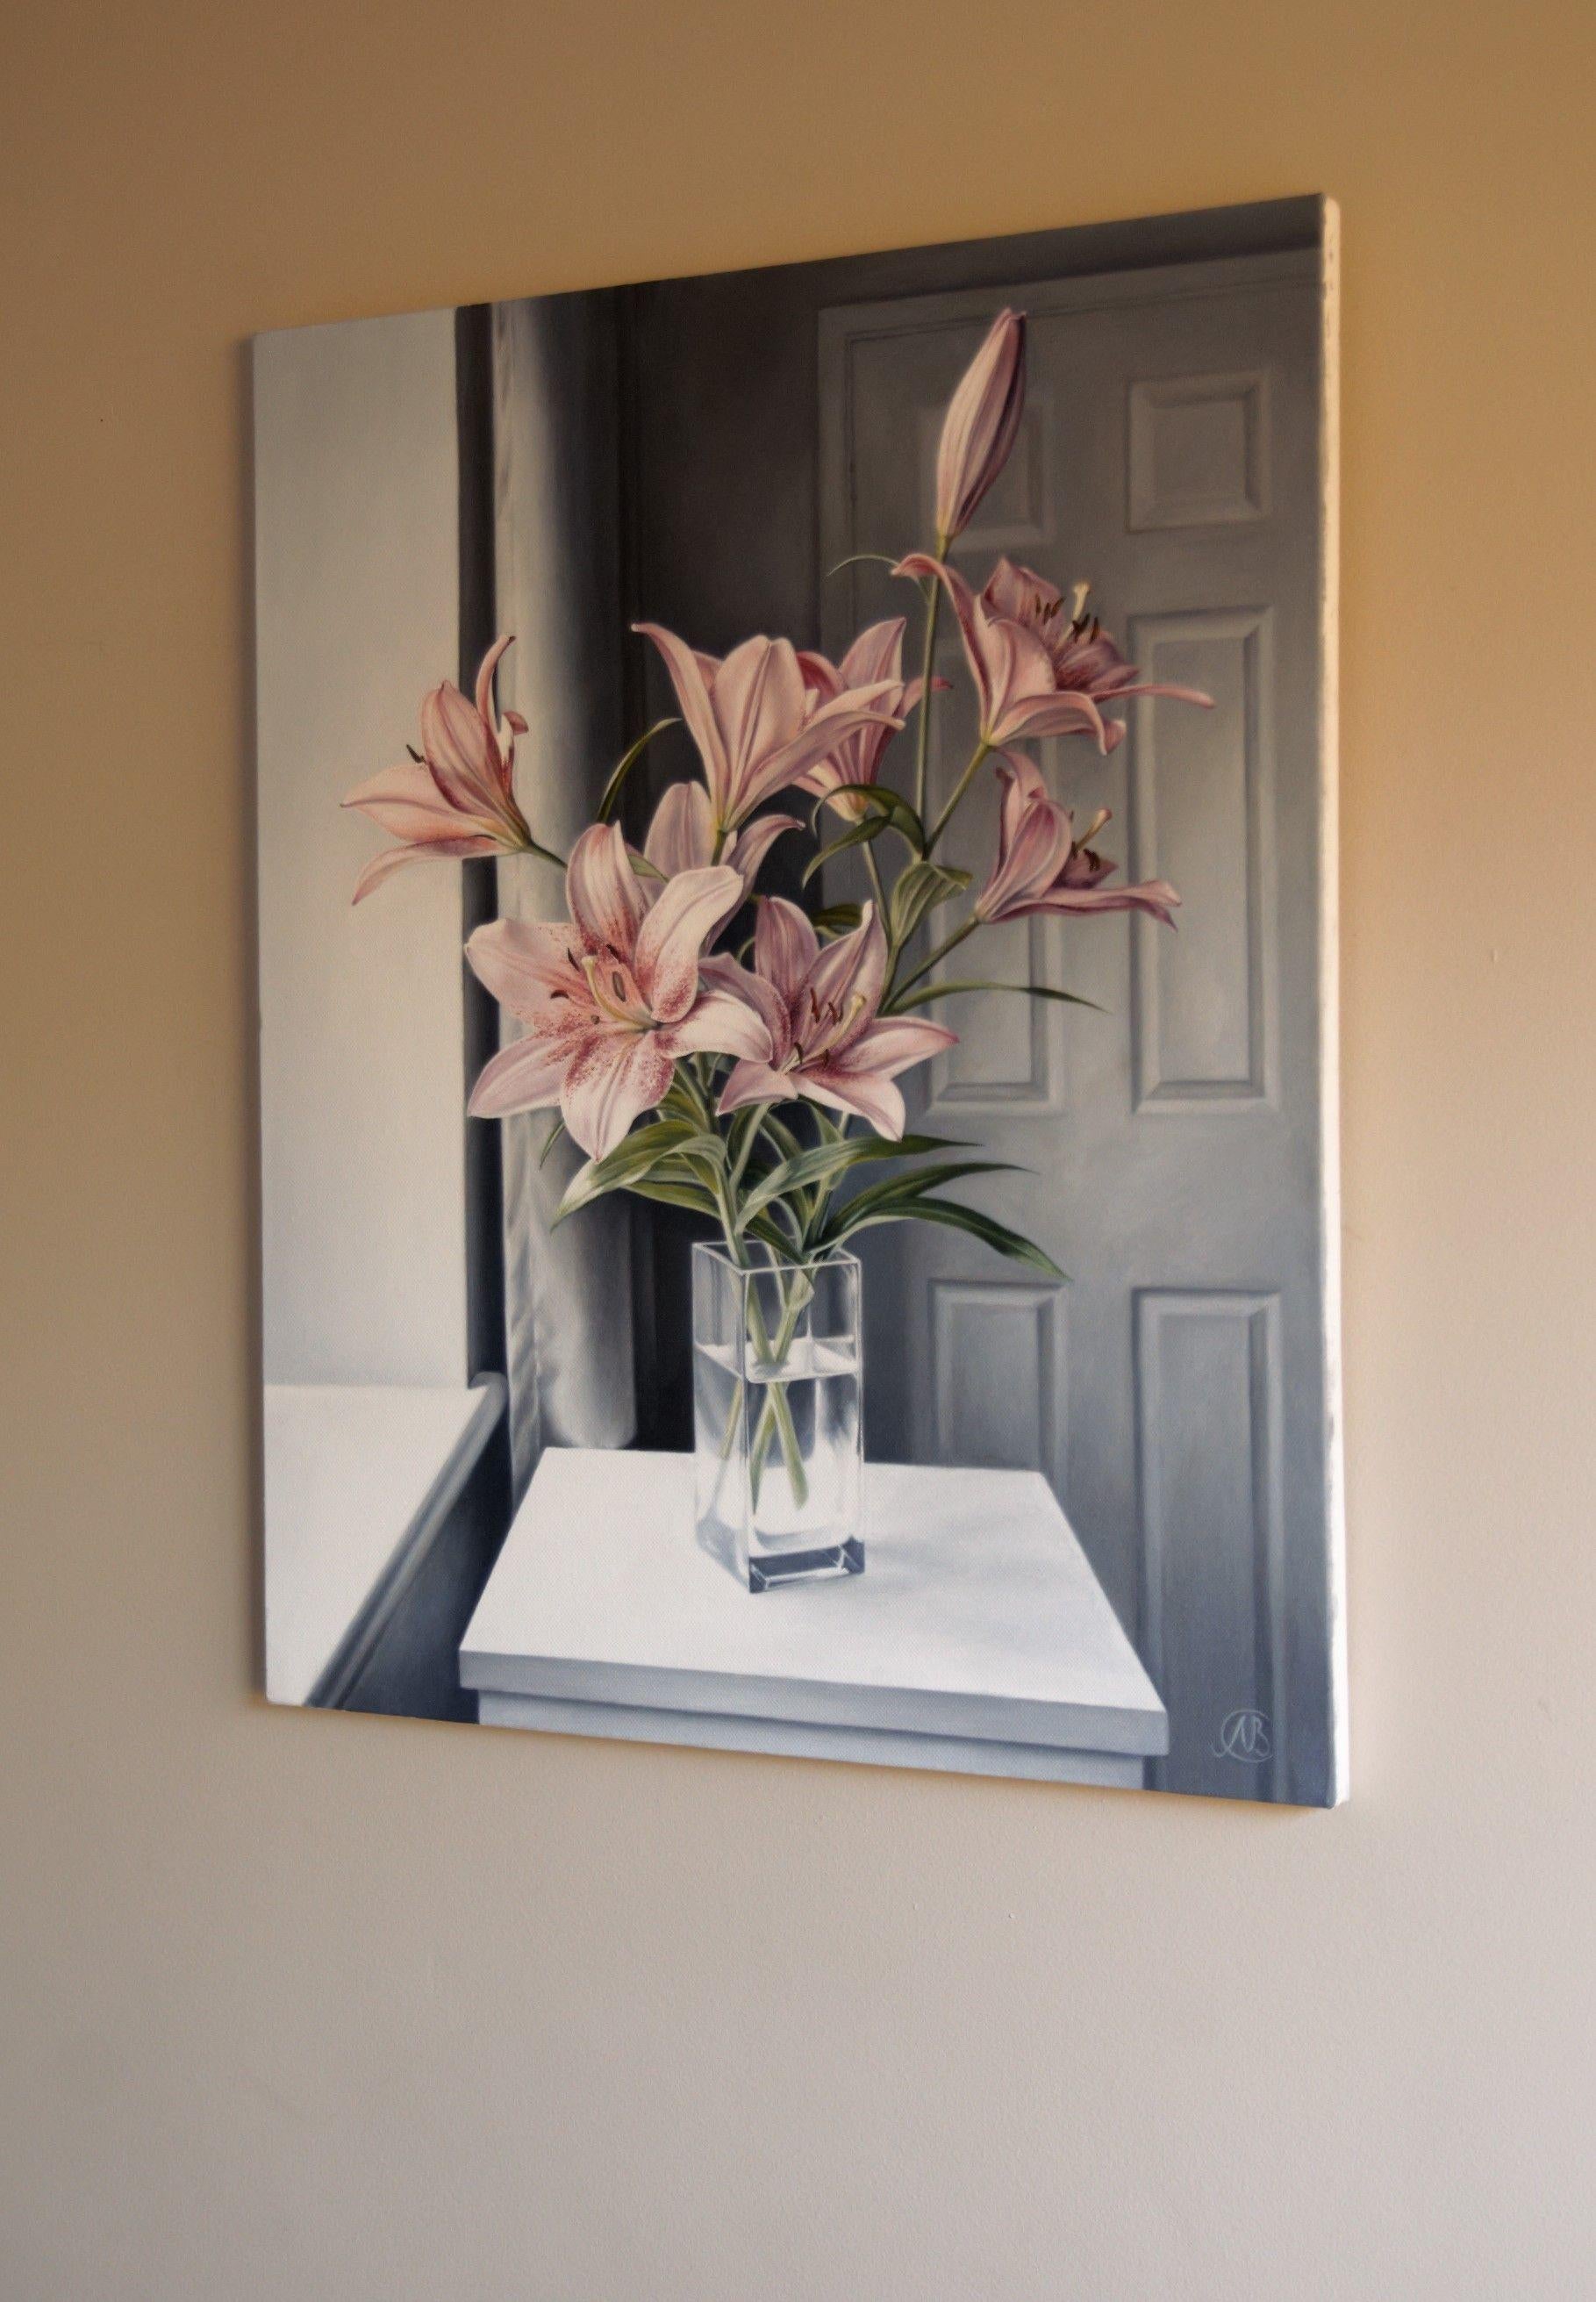 There are flowers I never tire of painting and lilies are among them.   I grew these lilies from bulbs in my garden and was very excited to watch them grow, develop buds and finally open. And of course, naturally, I couldnΓÇÖt resist painting their